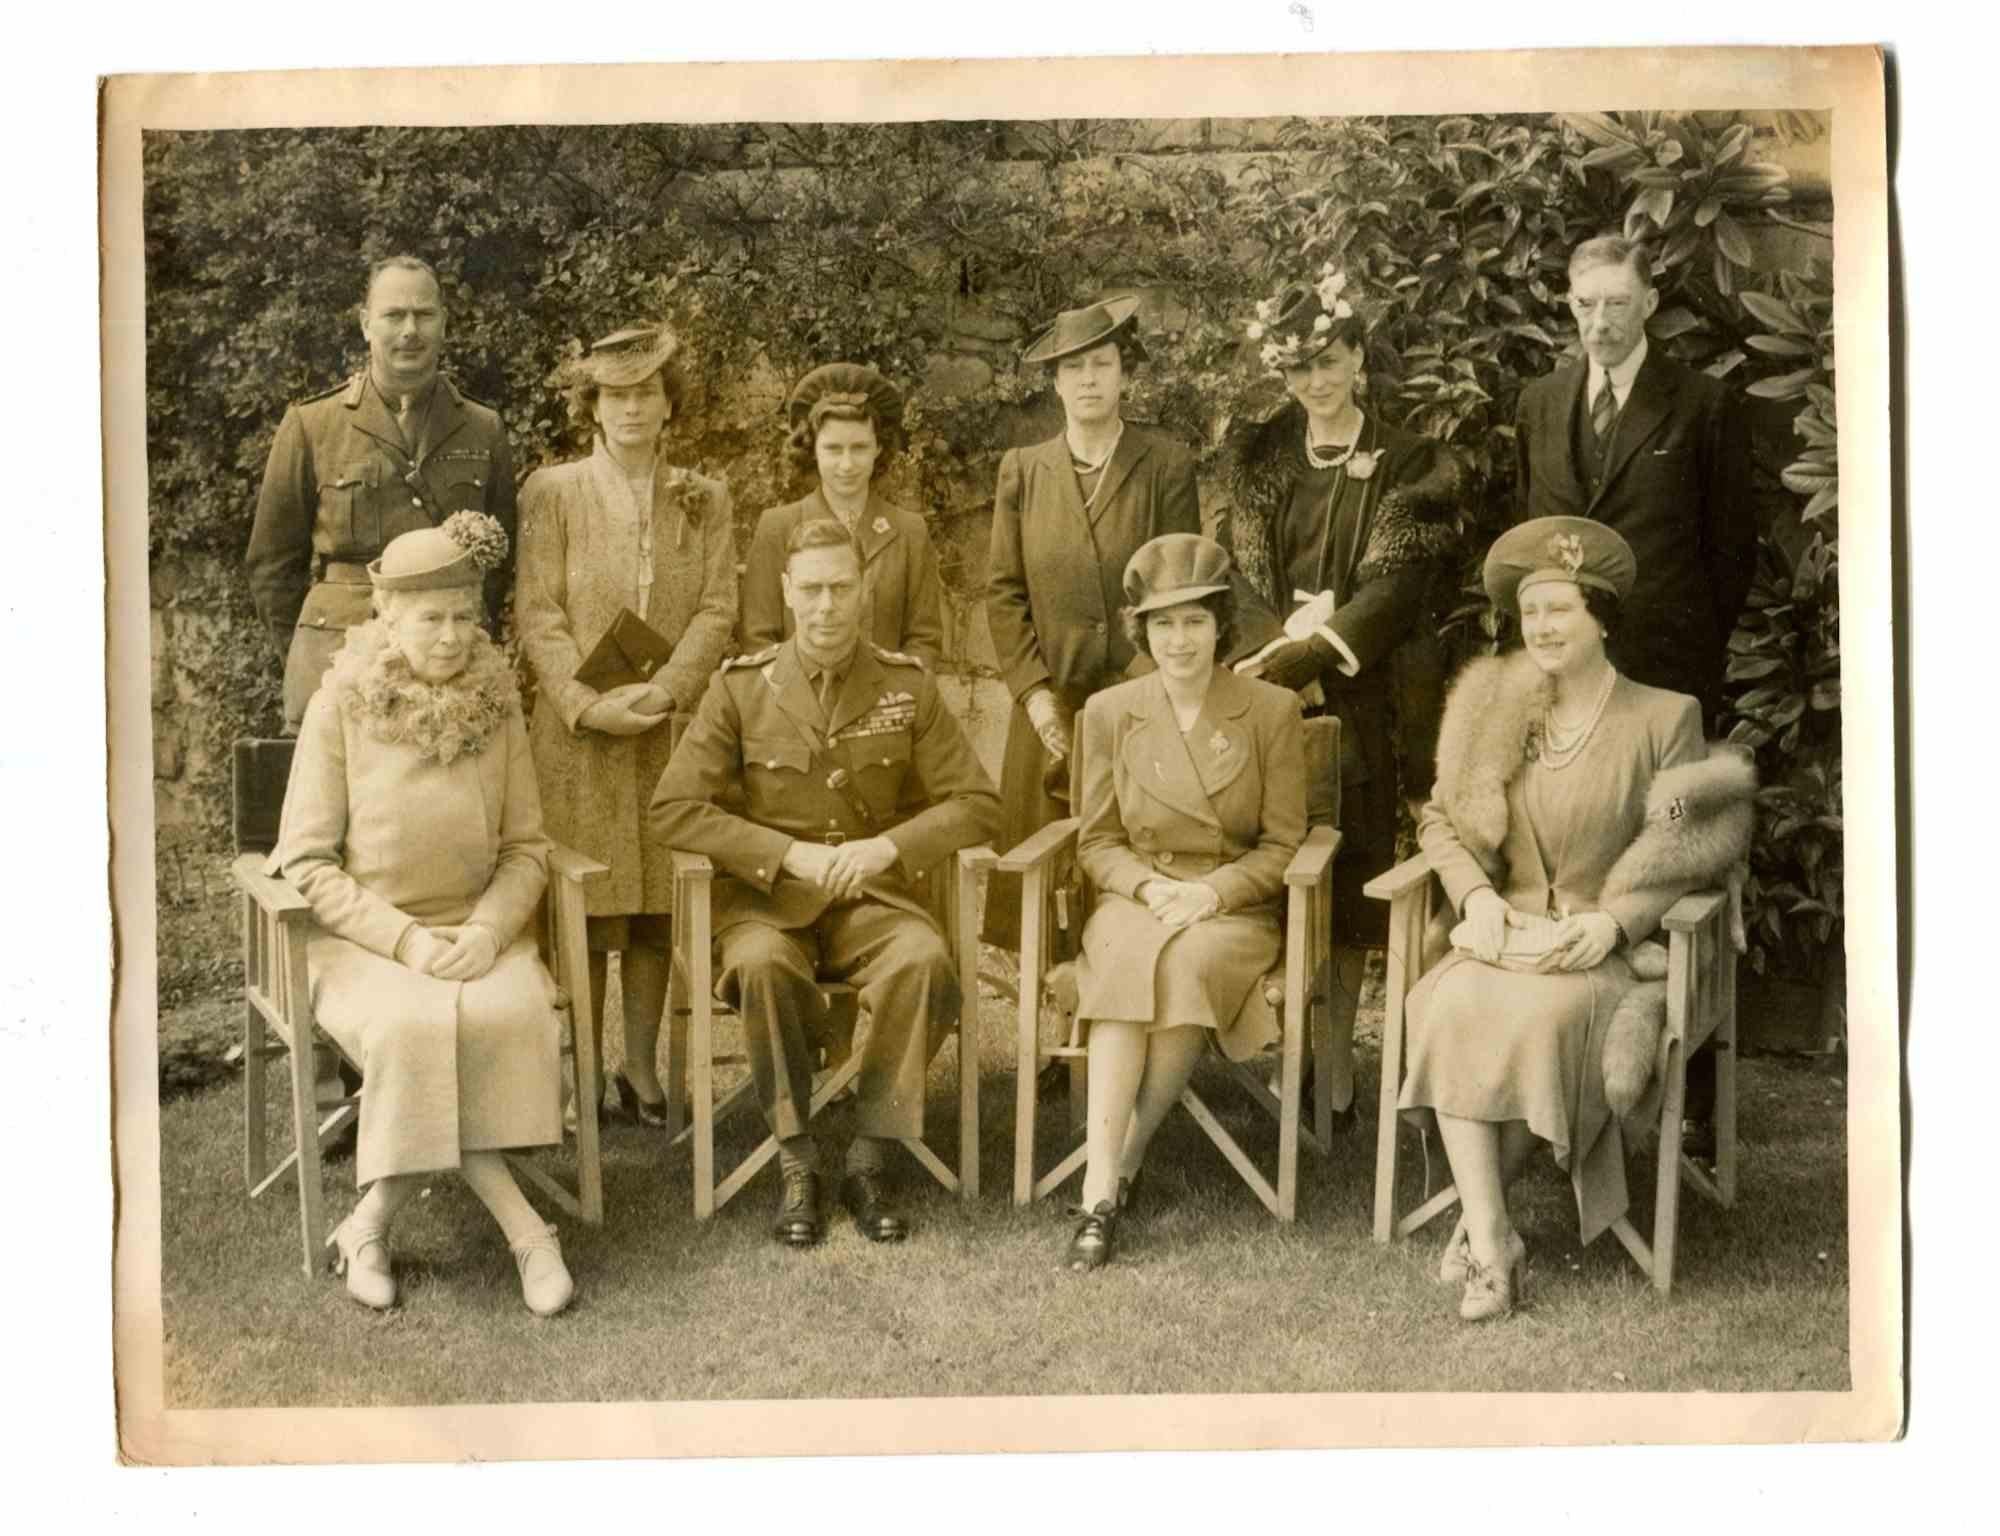 Unknown Figurative Photograph - Historical Photo - Royal Family of England - Vintage Photo - 1940s